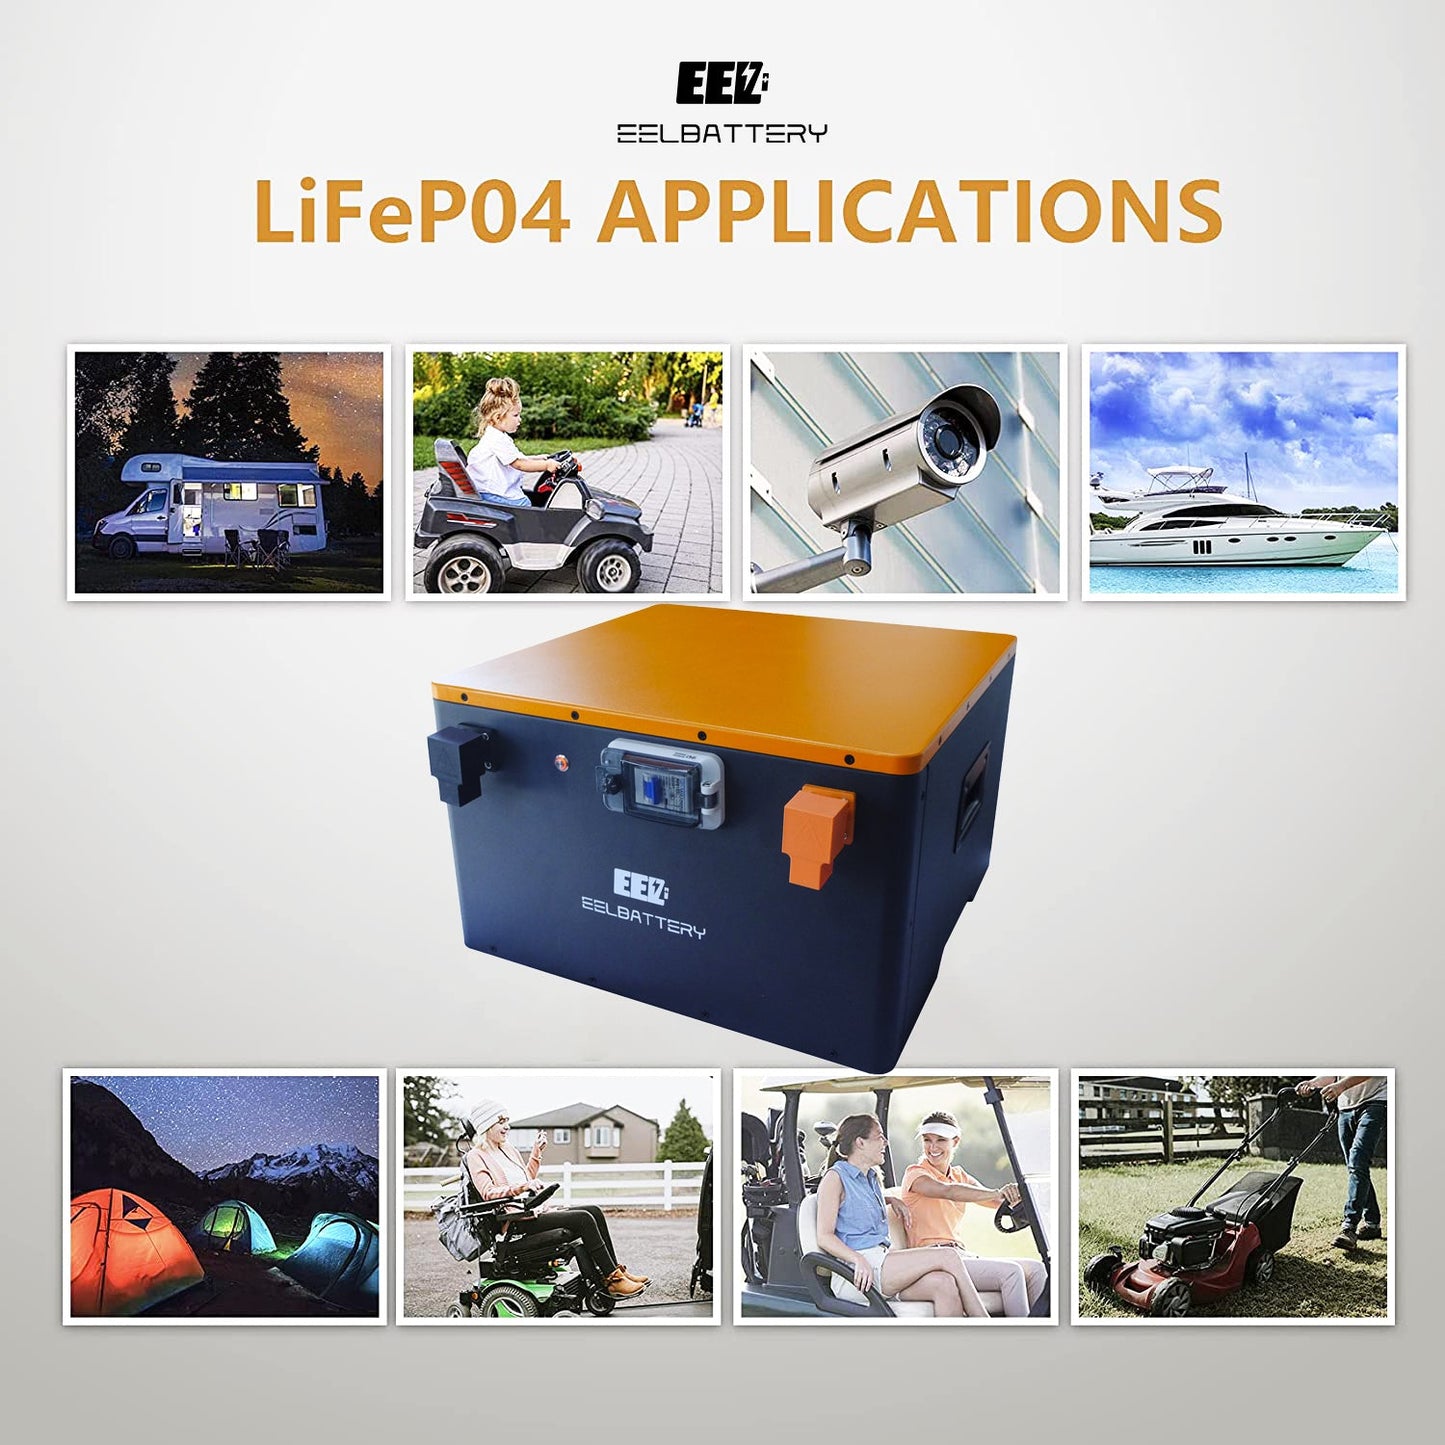 24V LiFePO4 Battery Pack with JK 200A Active Balance BMS for Solar Power,Golf Cart,RV,EV